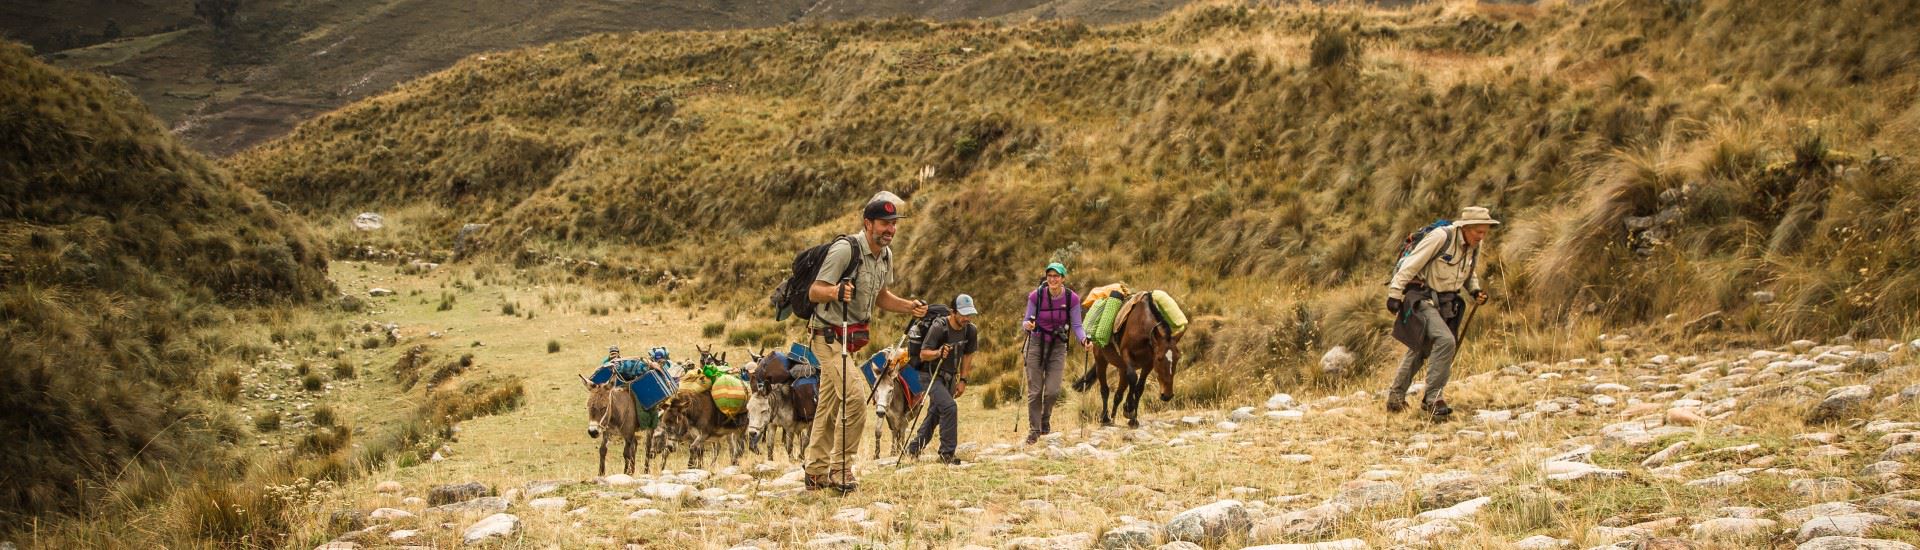 Great Inca Trail - Hikers climbing a hill